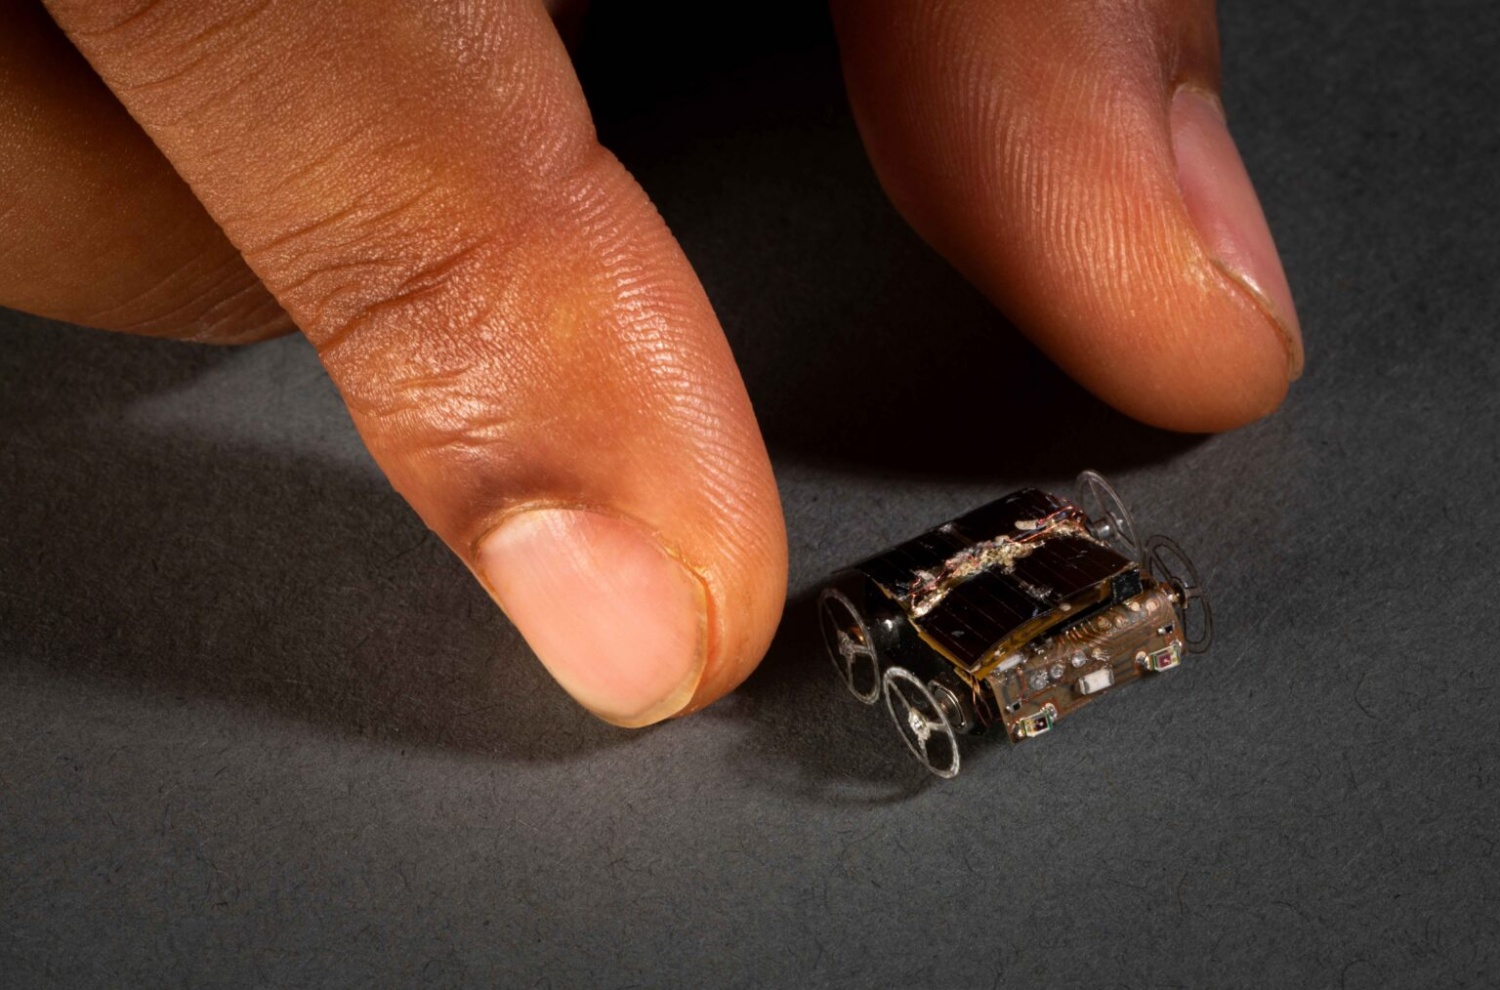 MilliMobile: This Tiny, Self-Driving Robot Runs Only by Surrounding Light, Radio Waves